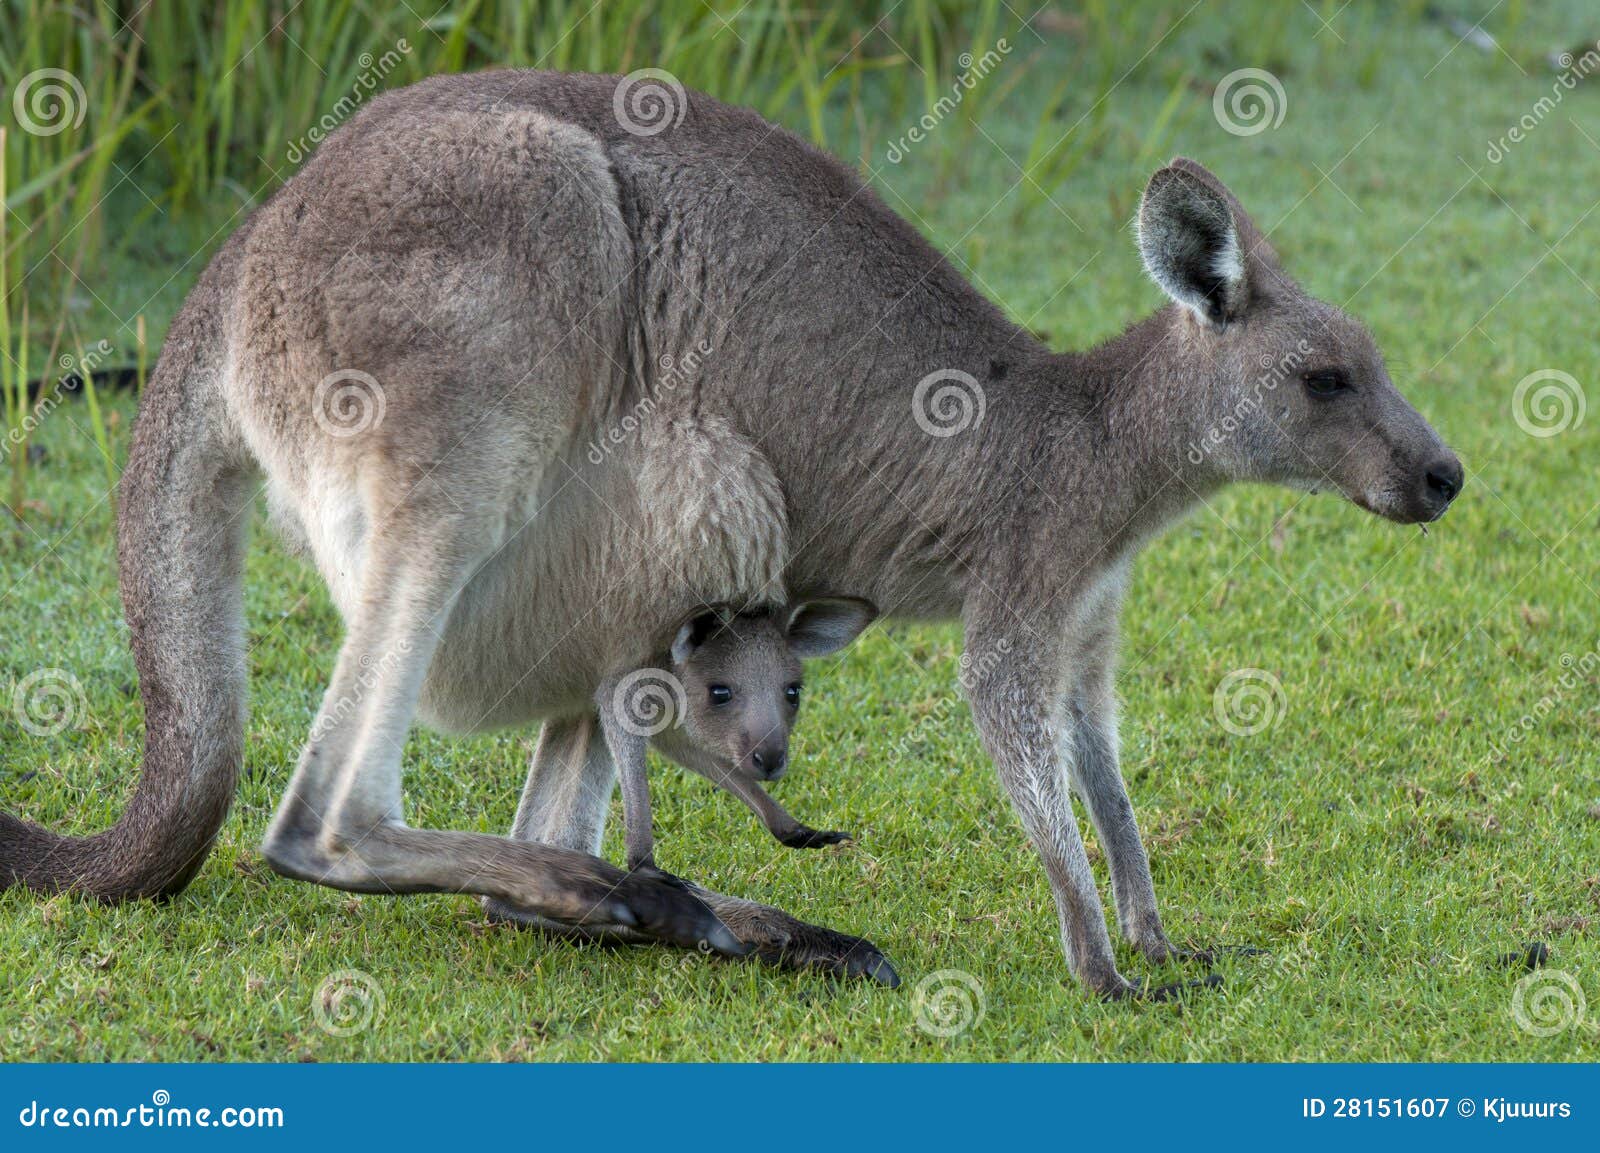 Kangaroo with Baby Joey in Pouch Stock Image - Image of pouch, animal:  28151607